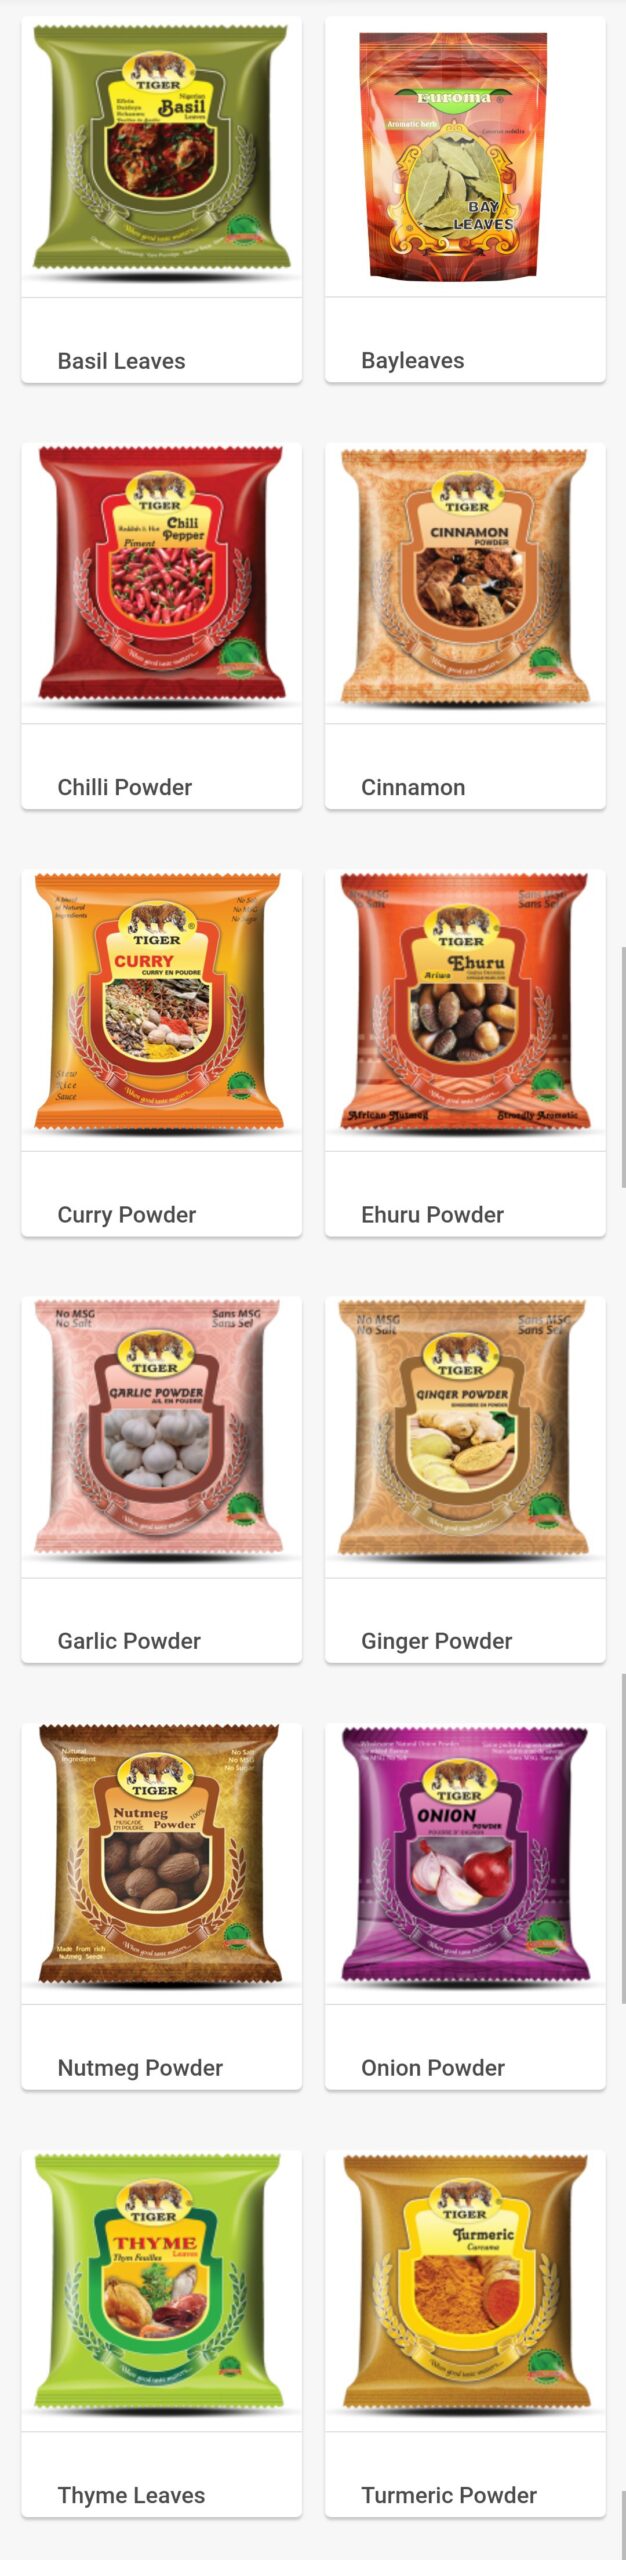 Tiger Foods Limited Sets New Standards in Spices, Seasonings, and Culinary Delights"